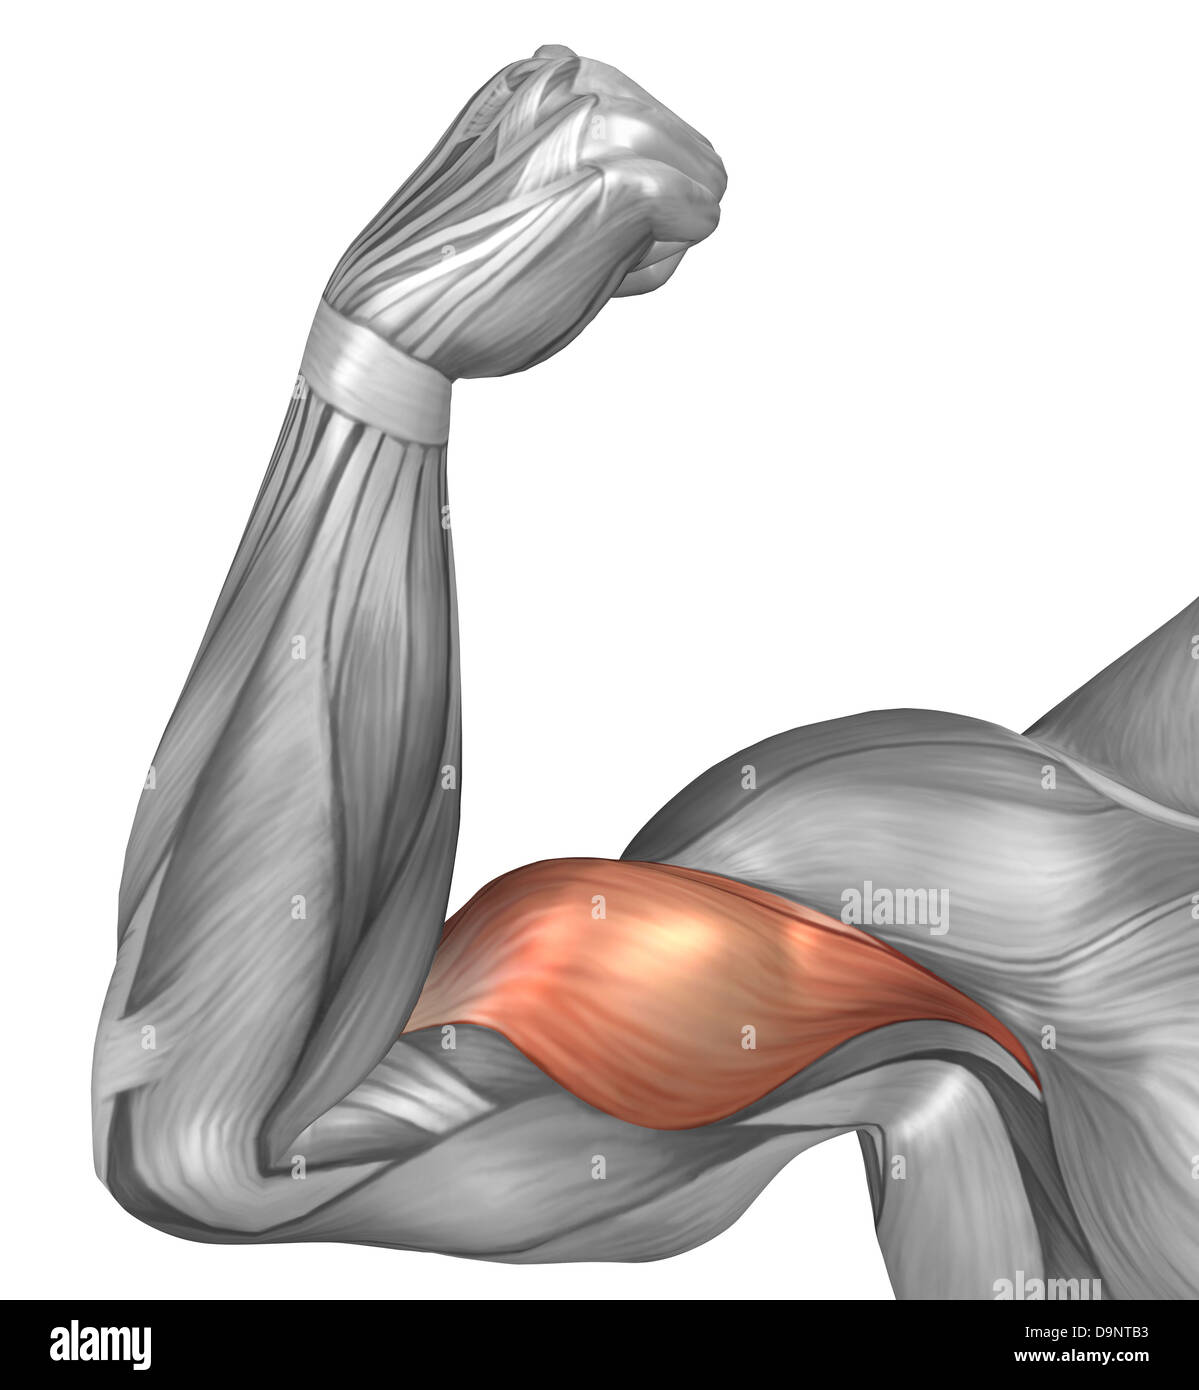 Illustration of a flexed arm showing bicep muscle. Stock Photo